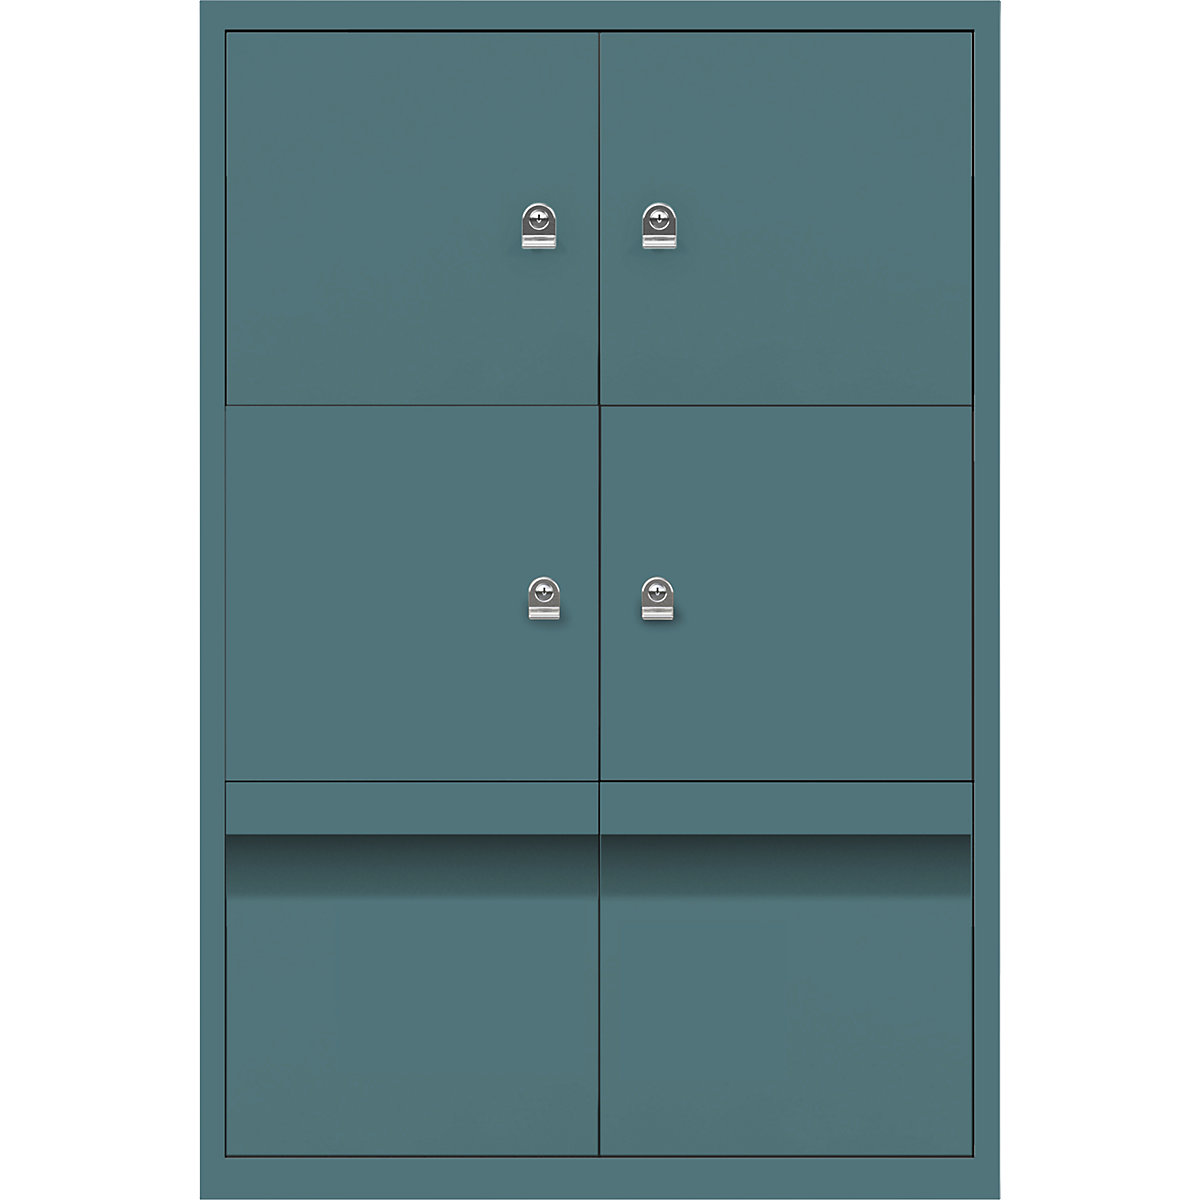 LateralFile™ lodge – BISLEY, with 4 lockable compartments and 2 drawers, height 375 mm each, doulton-13